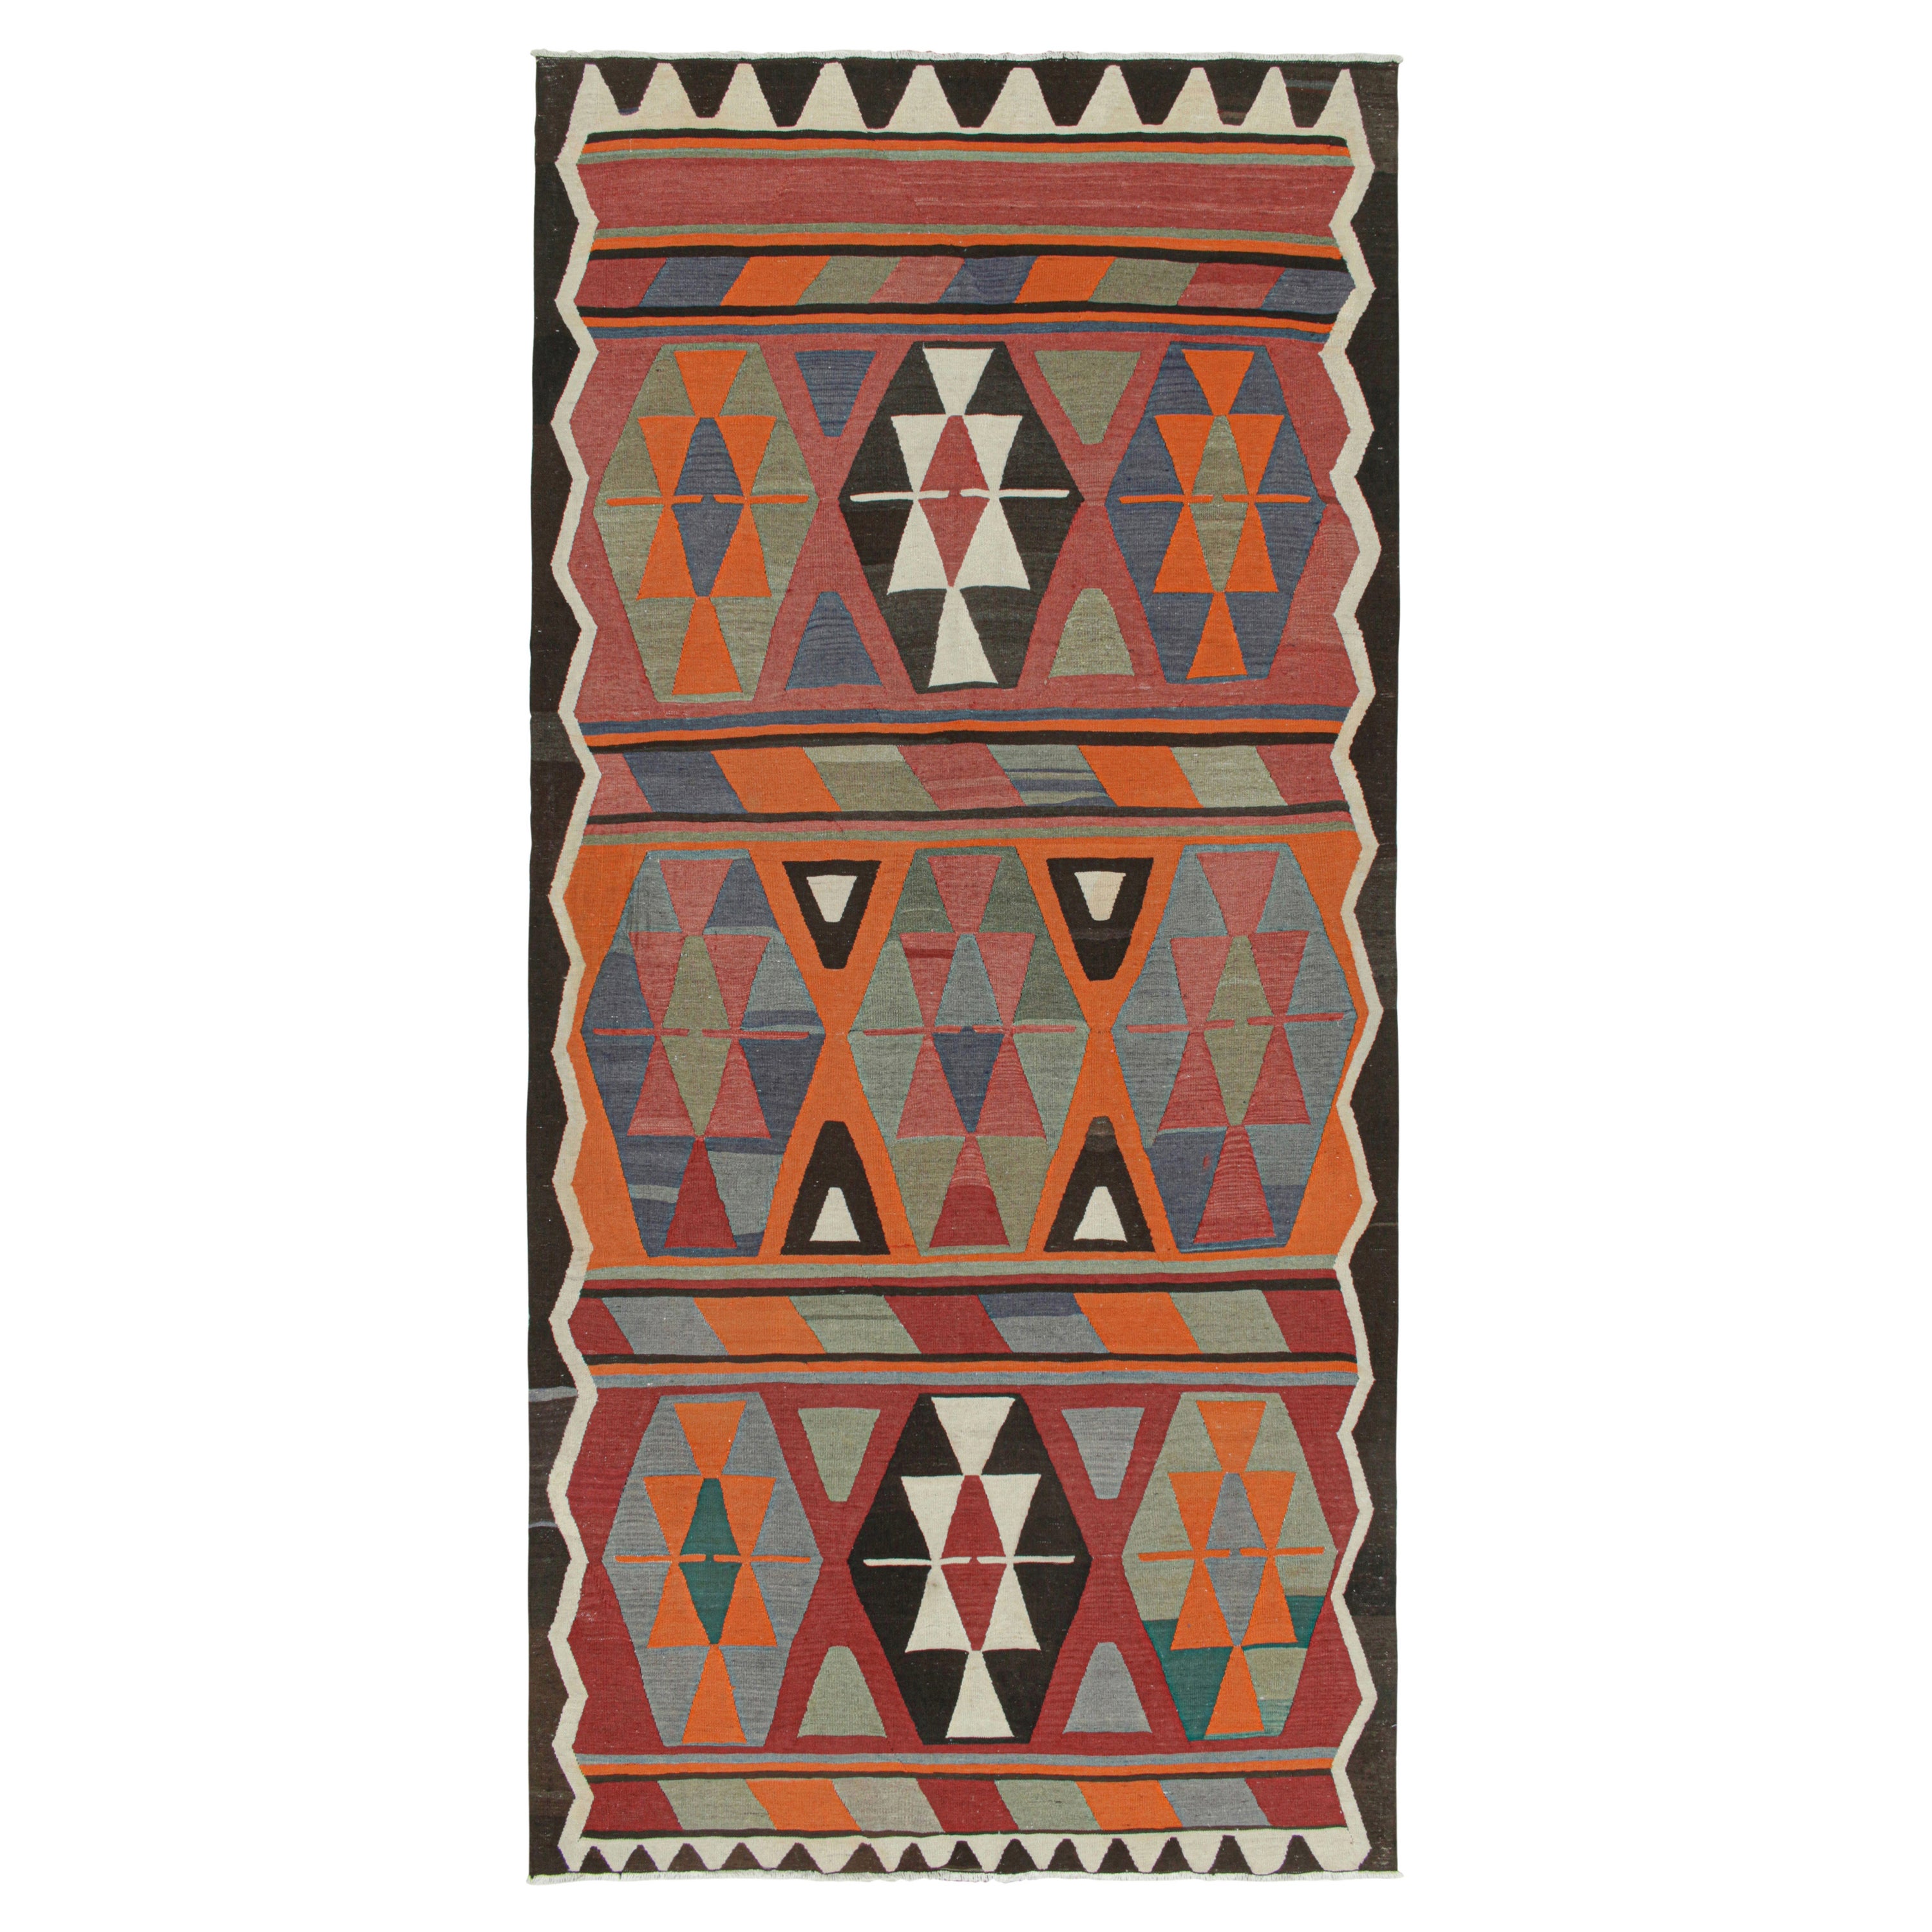 Vintage Persian Kilim with Polychromatic Geometric Patterns by Rug & Kilim For Sale